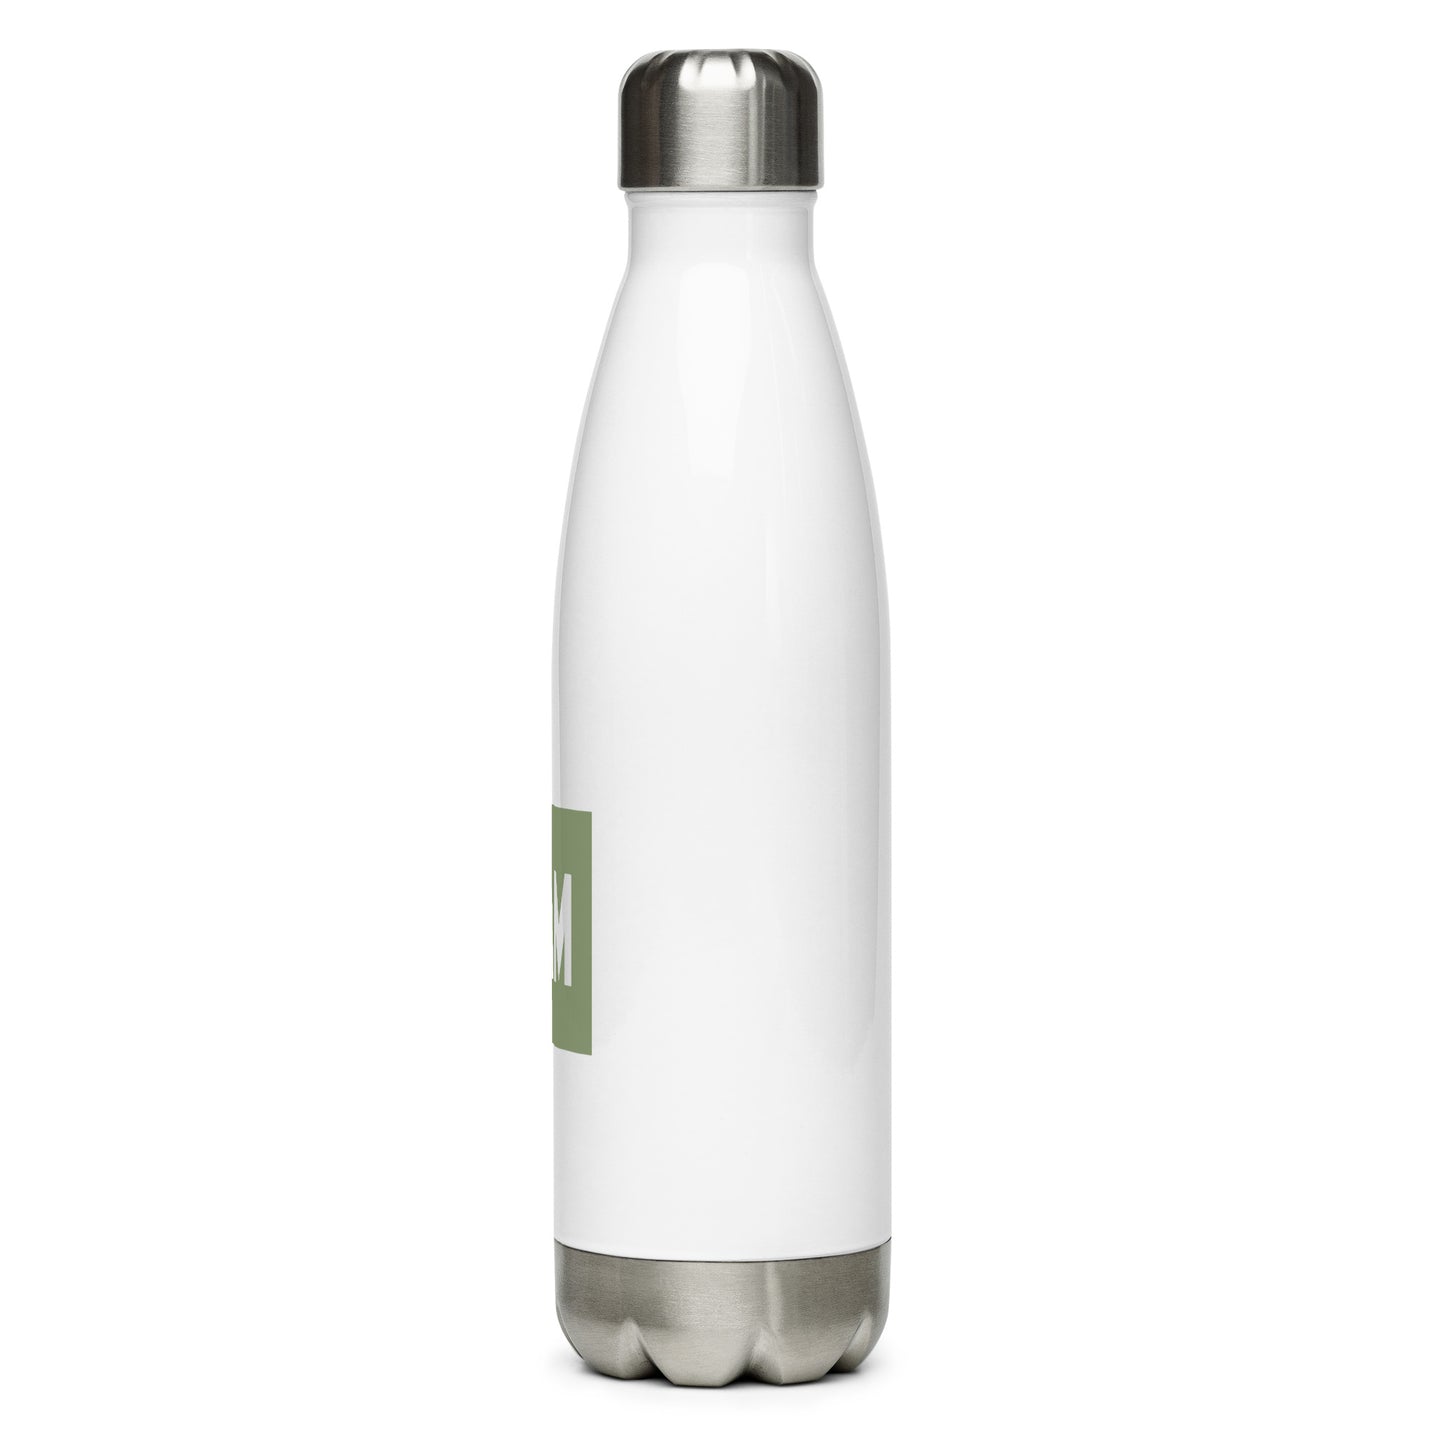 Aviation Gift Water Bottle - Camo Green • YAM Sault-Ste-Marie • YHM Designs - Image 08